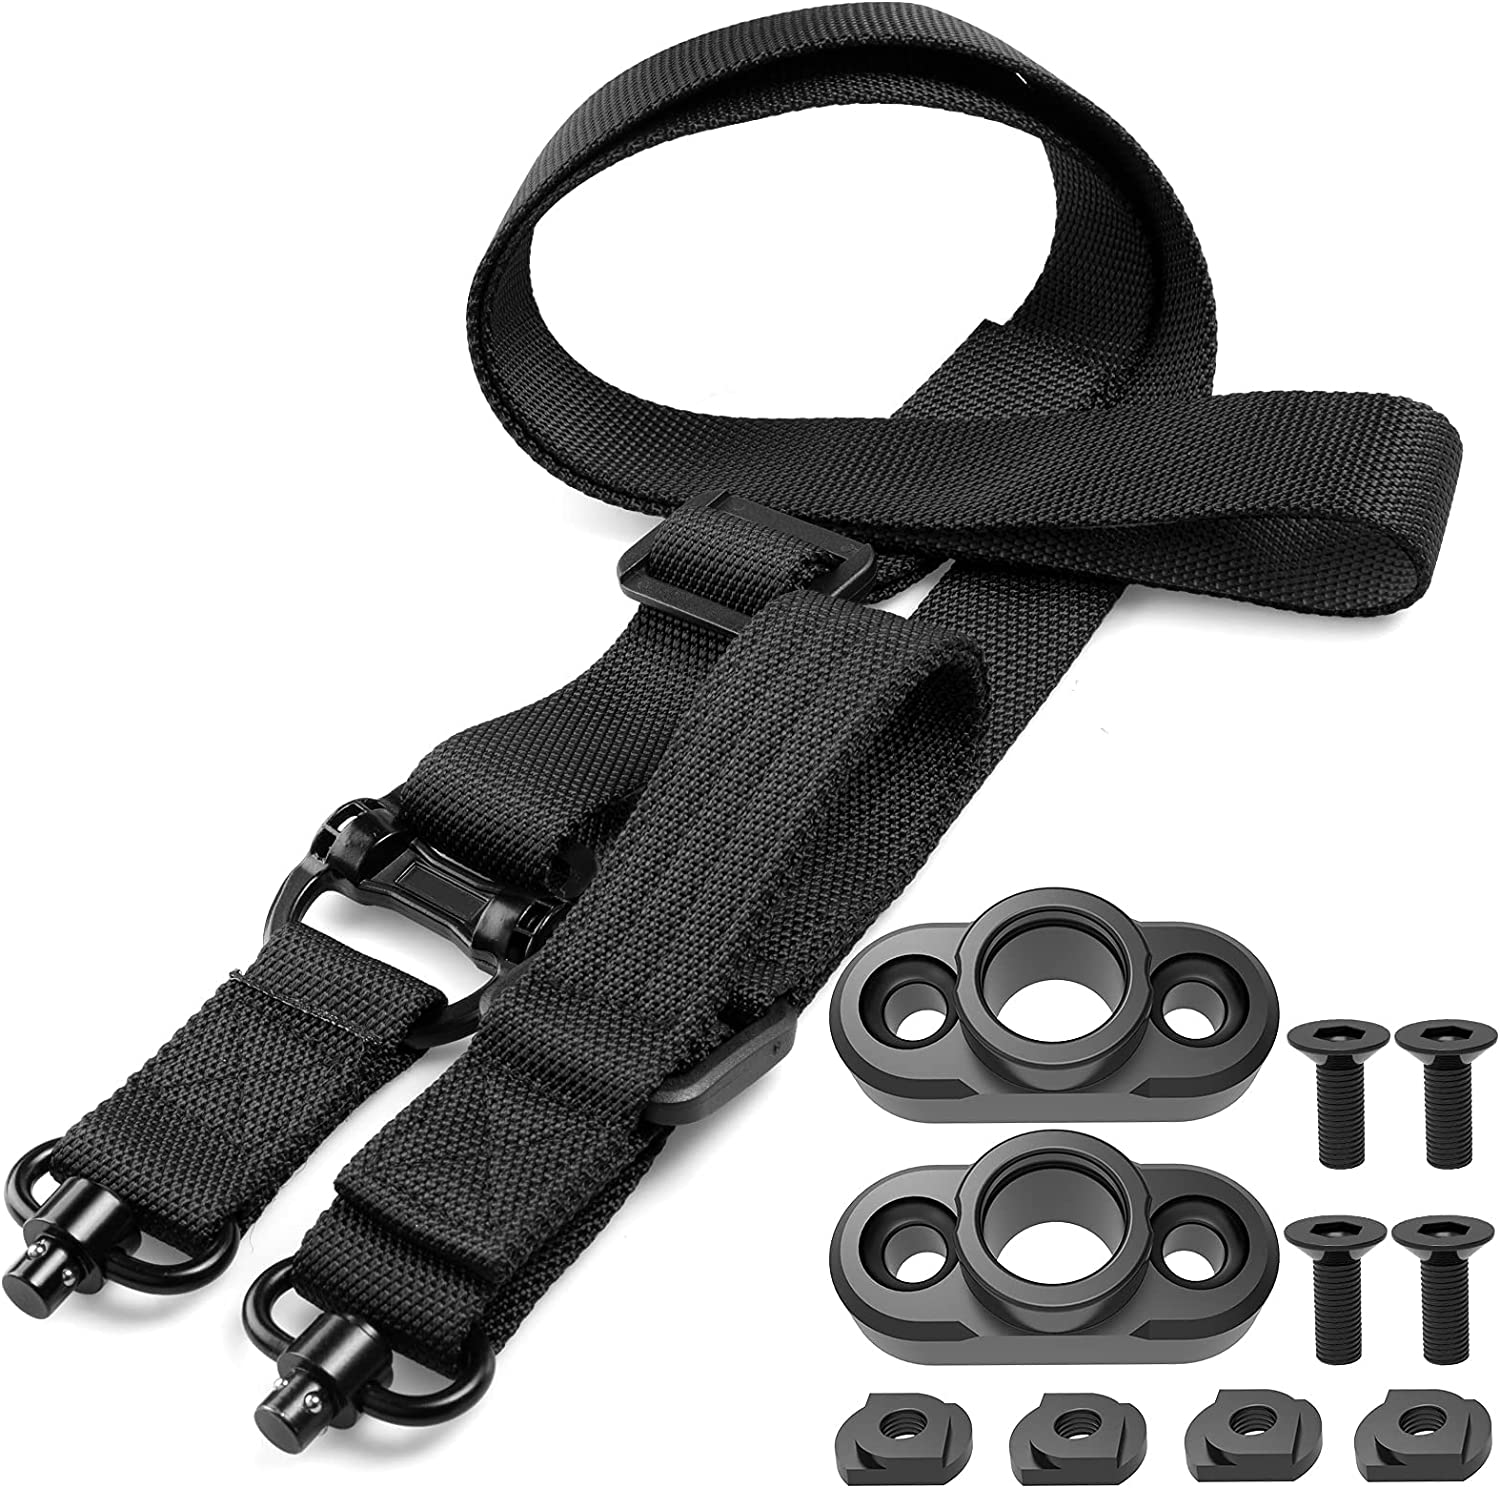 Rifle Sling 2 Point Sling Quick Adjust with QD Sling Swivels, 2 PCS QD for Mlok Rail, Two Point Sling Gun Sling Strap with Fast Adjust Loop Quick Release Sling Attachment